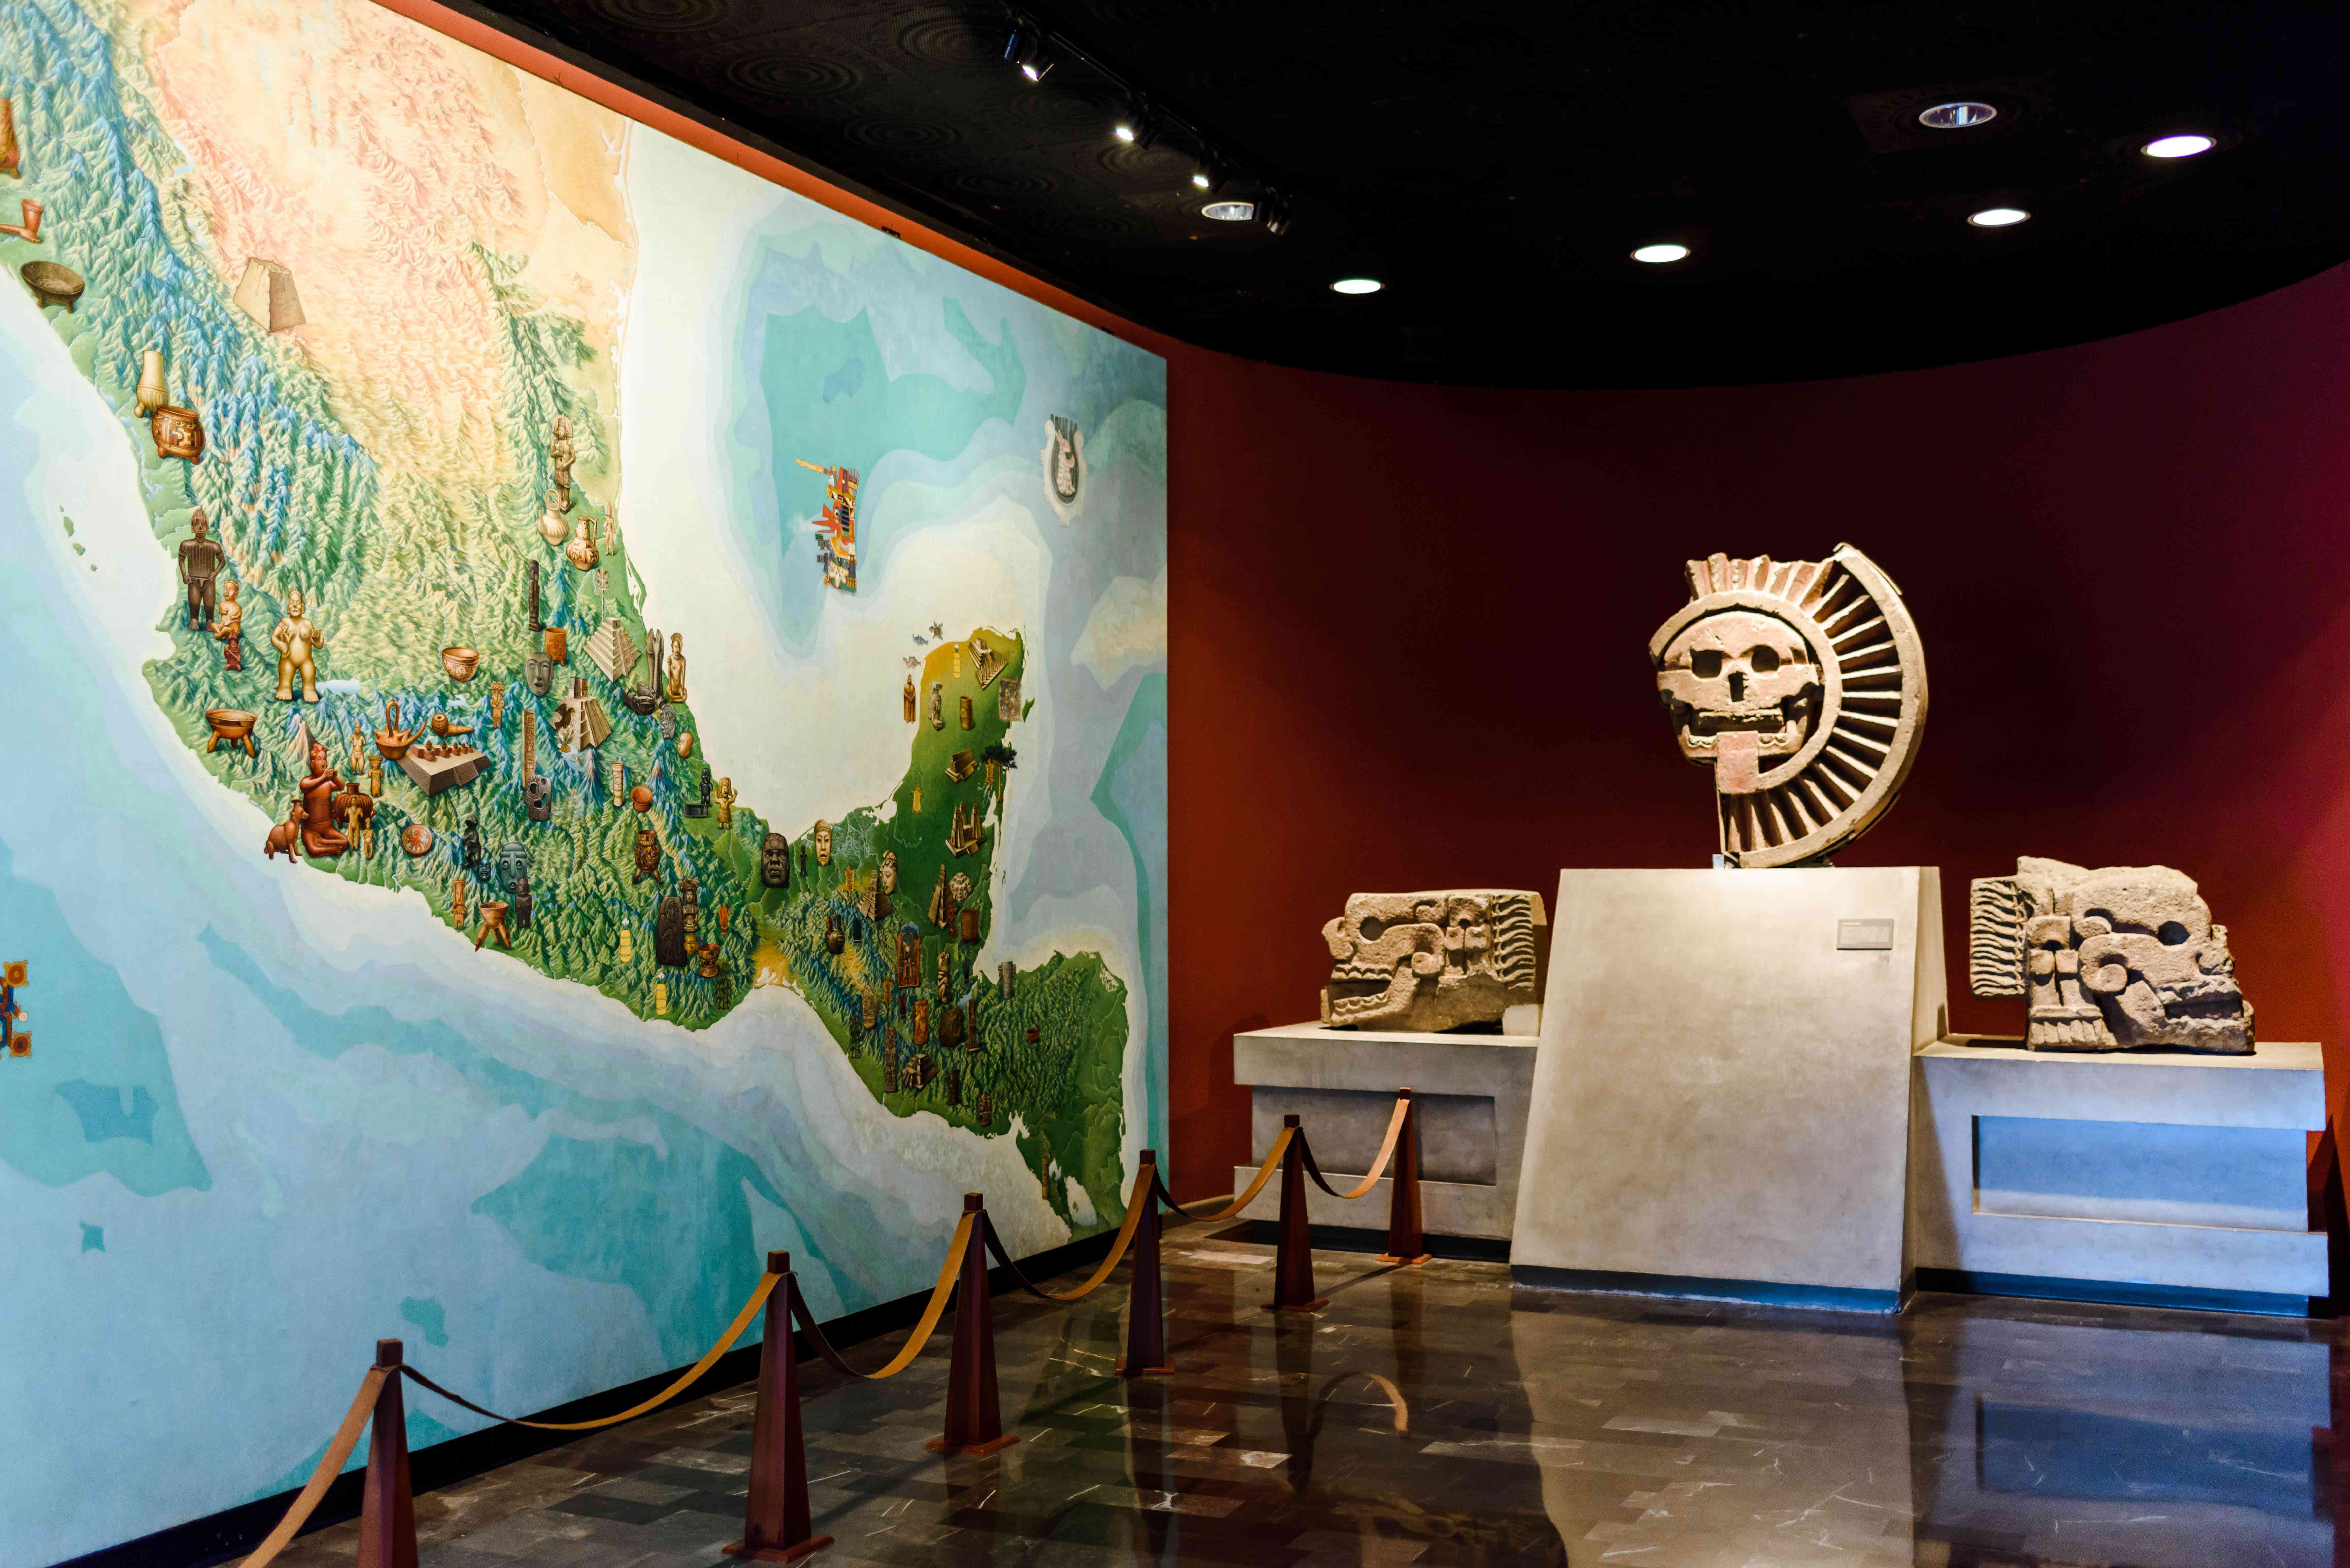 Top 7 Museums in Mexico City